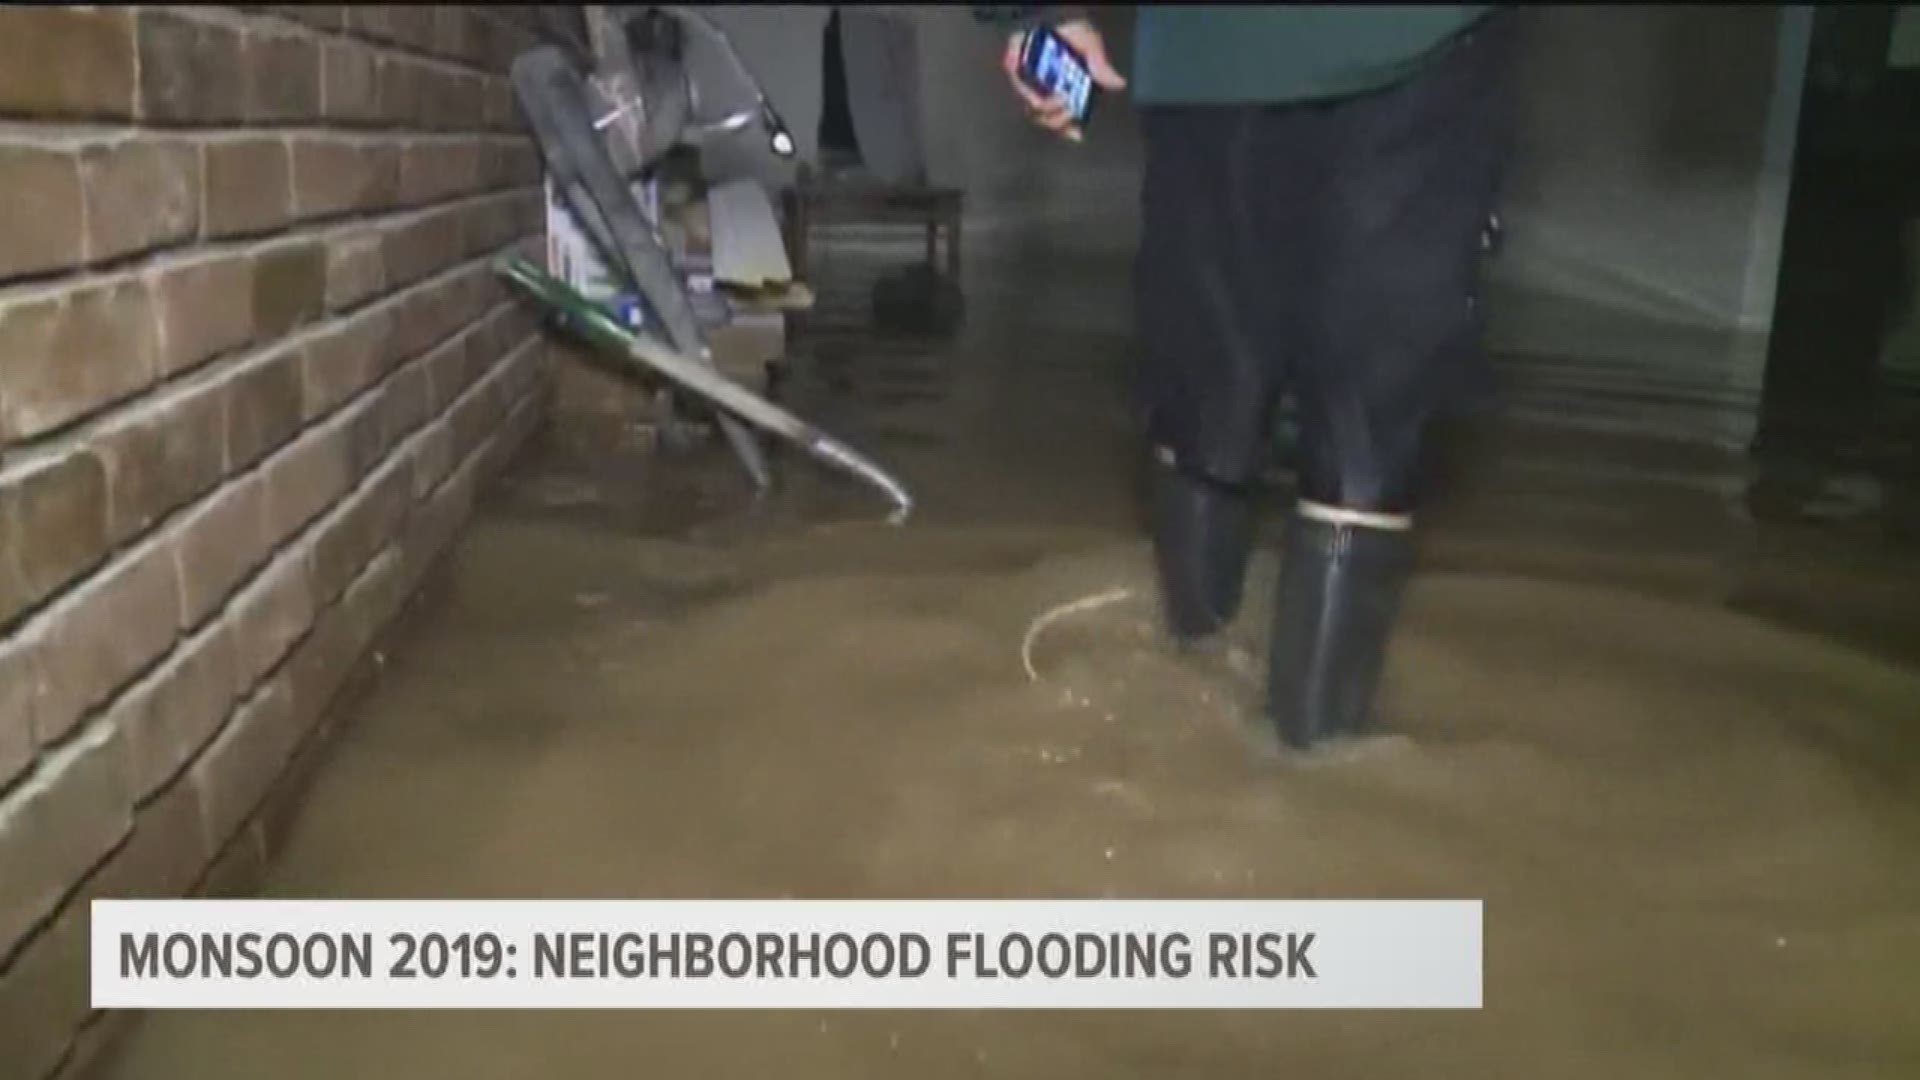 We take a look at the flooding risks of Valley neighborhoods and the things you can do to protect your home. Kristen Keogh gives us the details.